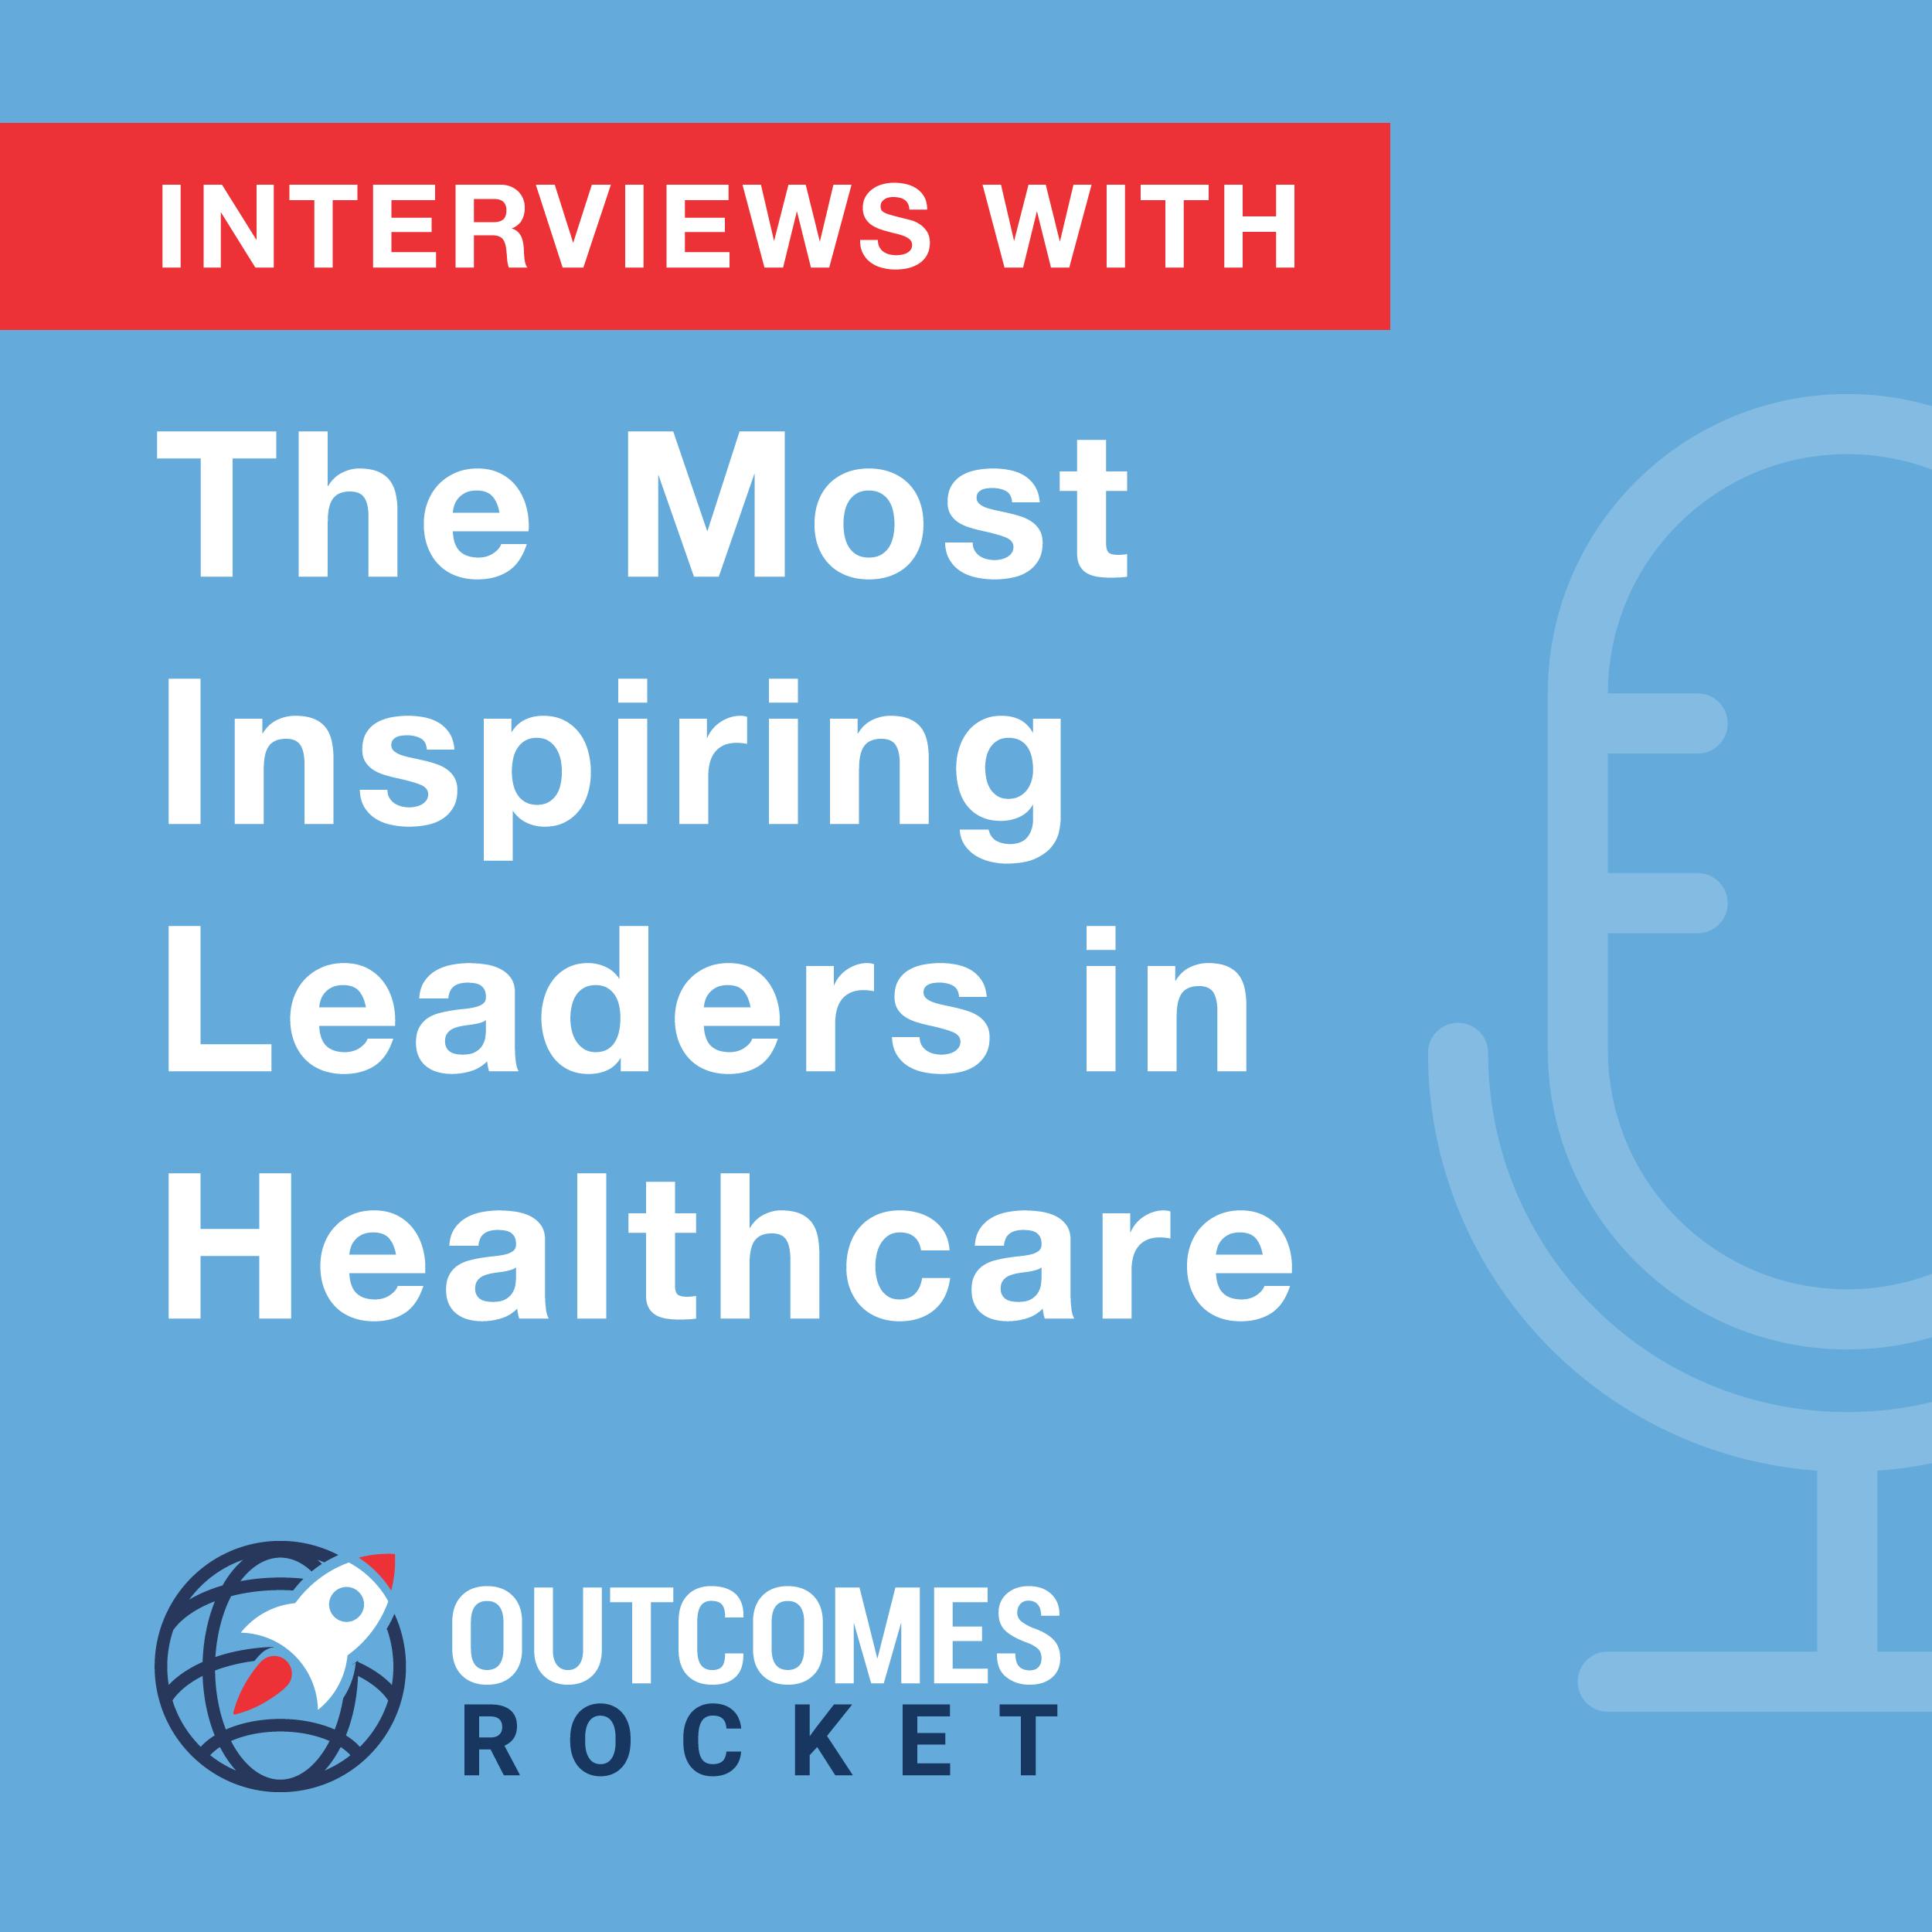 How to Synchronize Patient Engagement with Modern Lifestyles with Chris Nicholson, CEO and Co-founder at mPulse Mobile